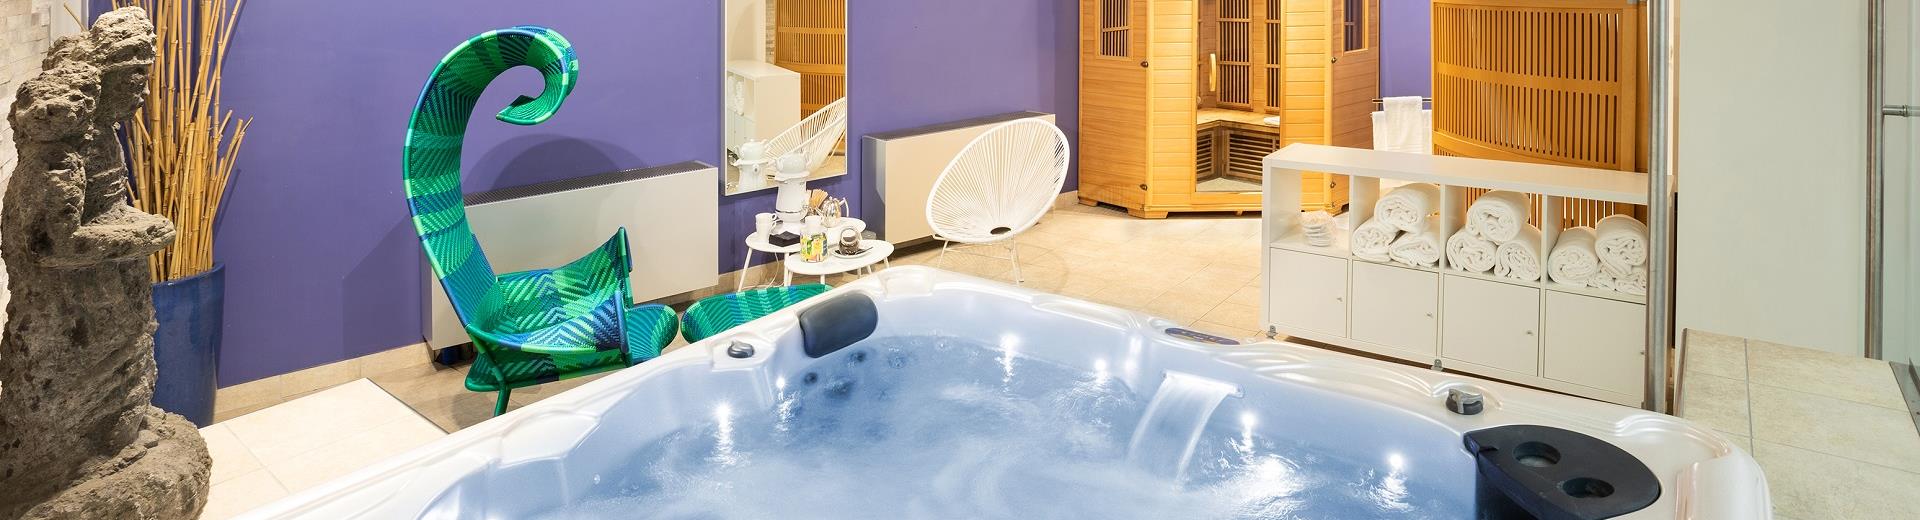 Relax in the wellness center of our hotel in central Turin